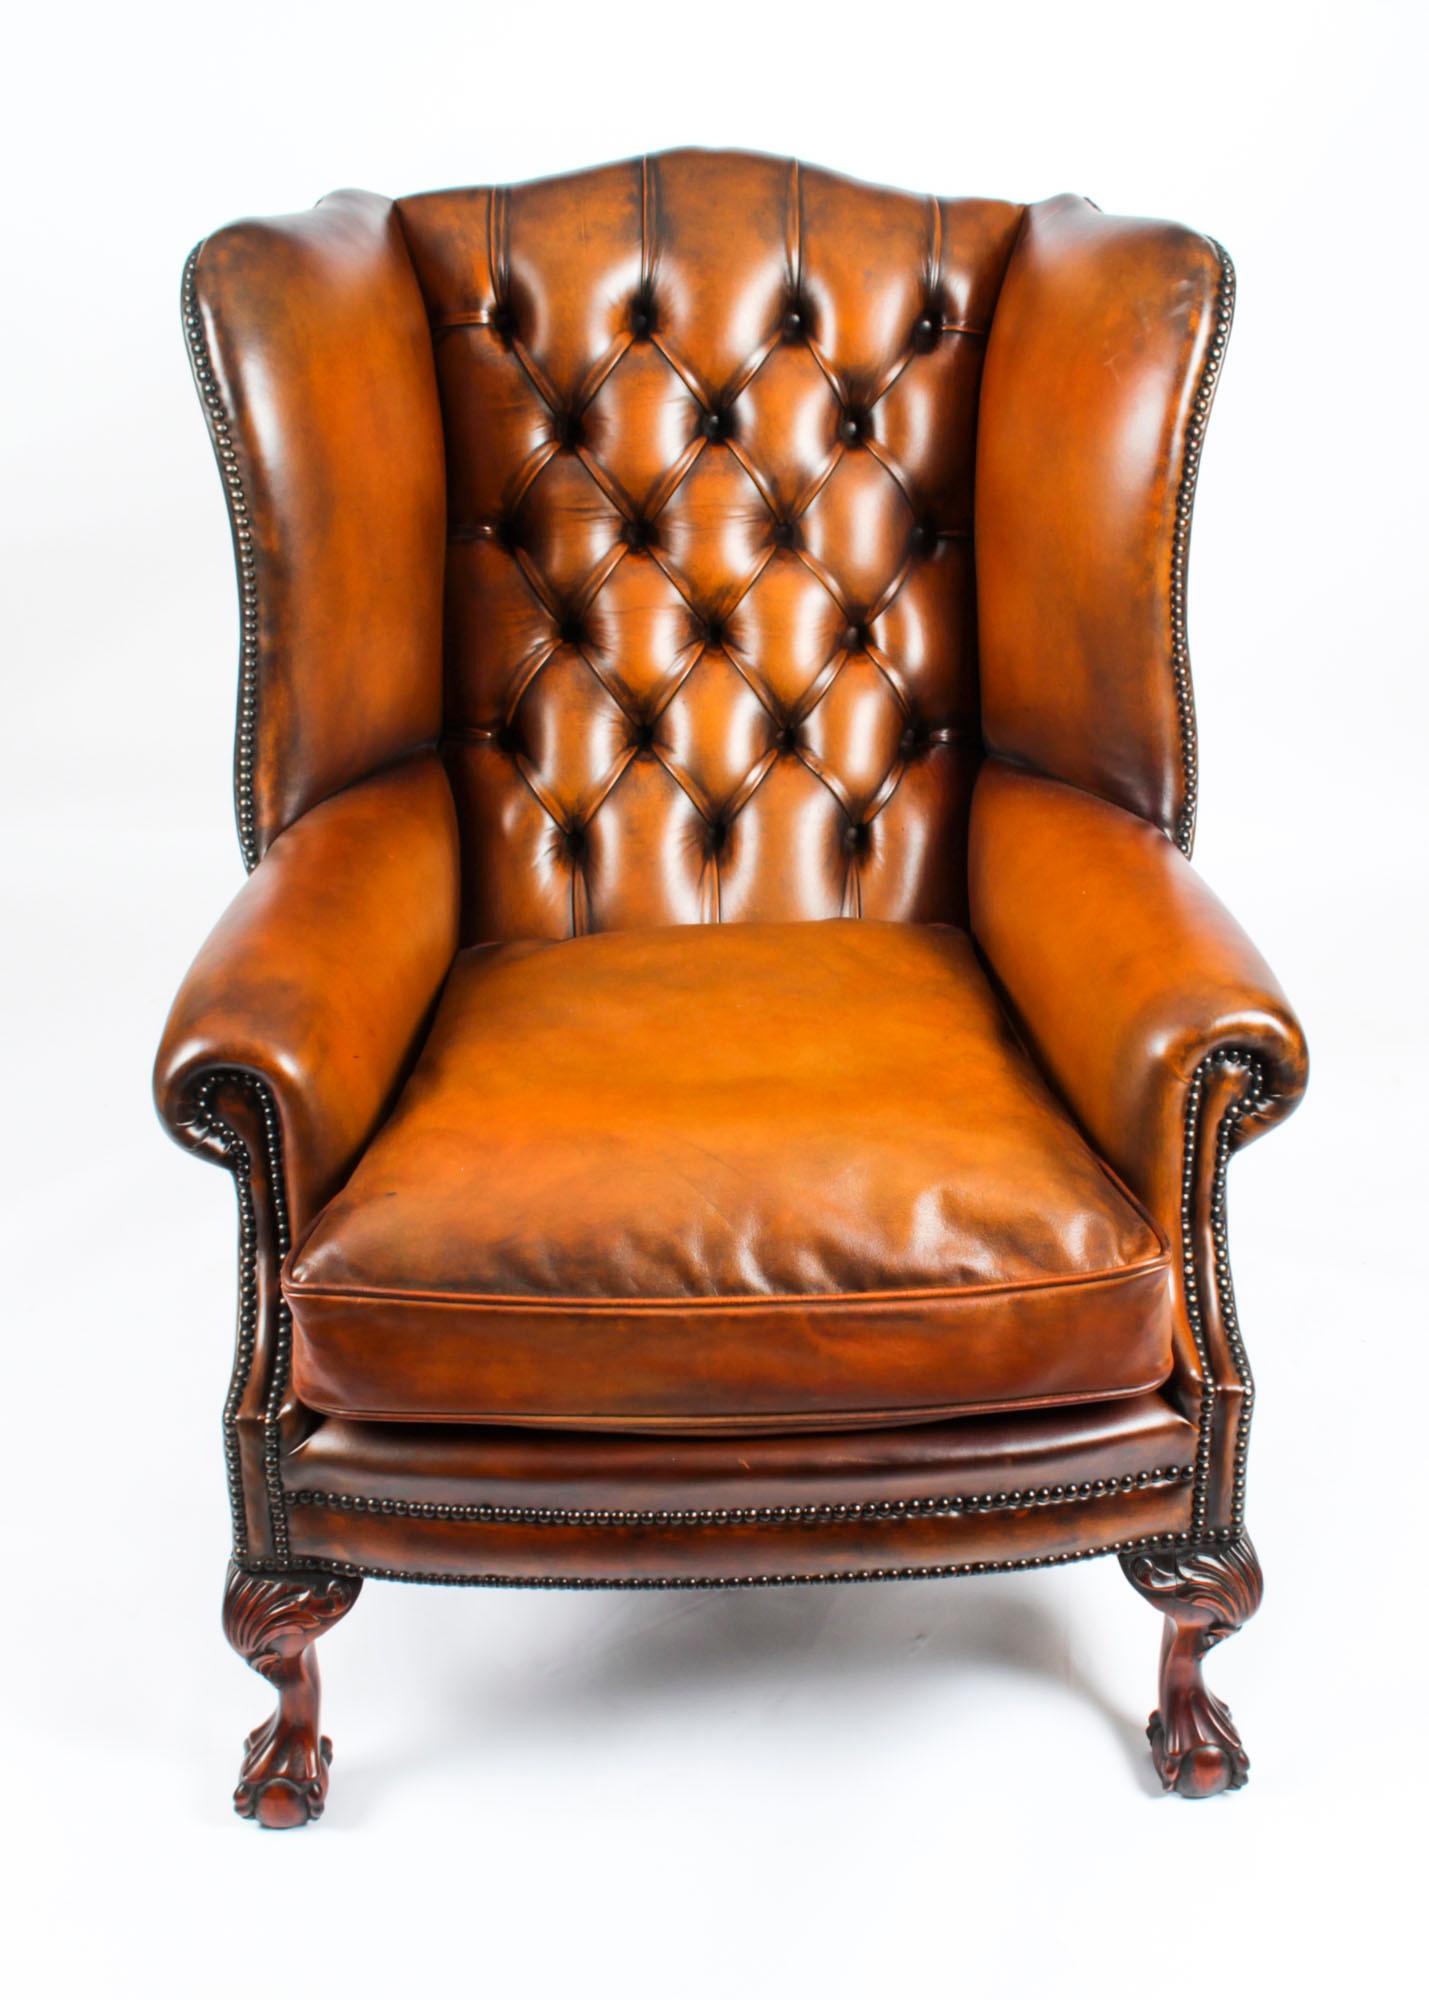 This is an absolutely fabulous pair of antique English button back leather wingback Chippendale Revival  armchairs, circa 1920 in date.

They stand on hand carved ball and claw cabriole legs with acanthus decoration.

The leather is of superb